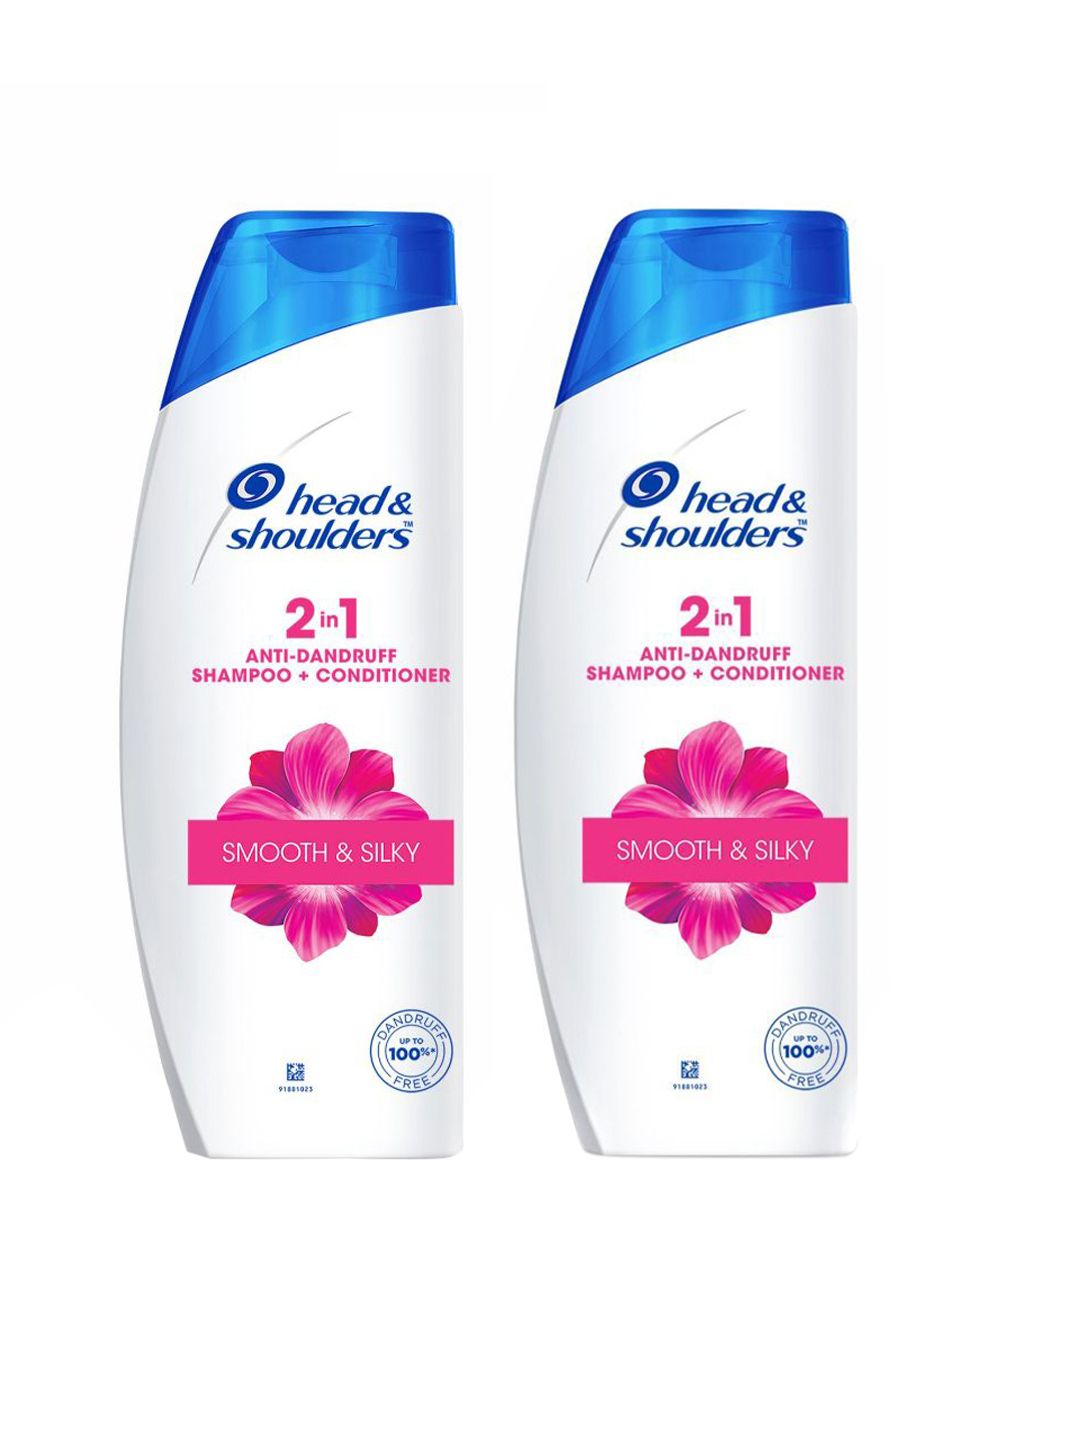 Head & Shoulders Set of 2 Smooth & Silky 2 in 1 Anti Dandruff Shampoo & Conditioner Price in India